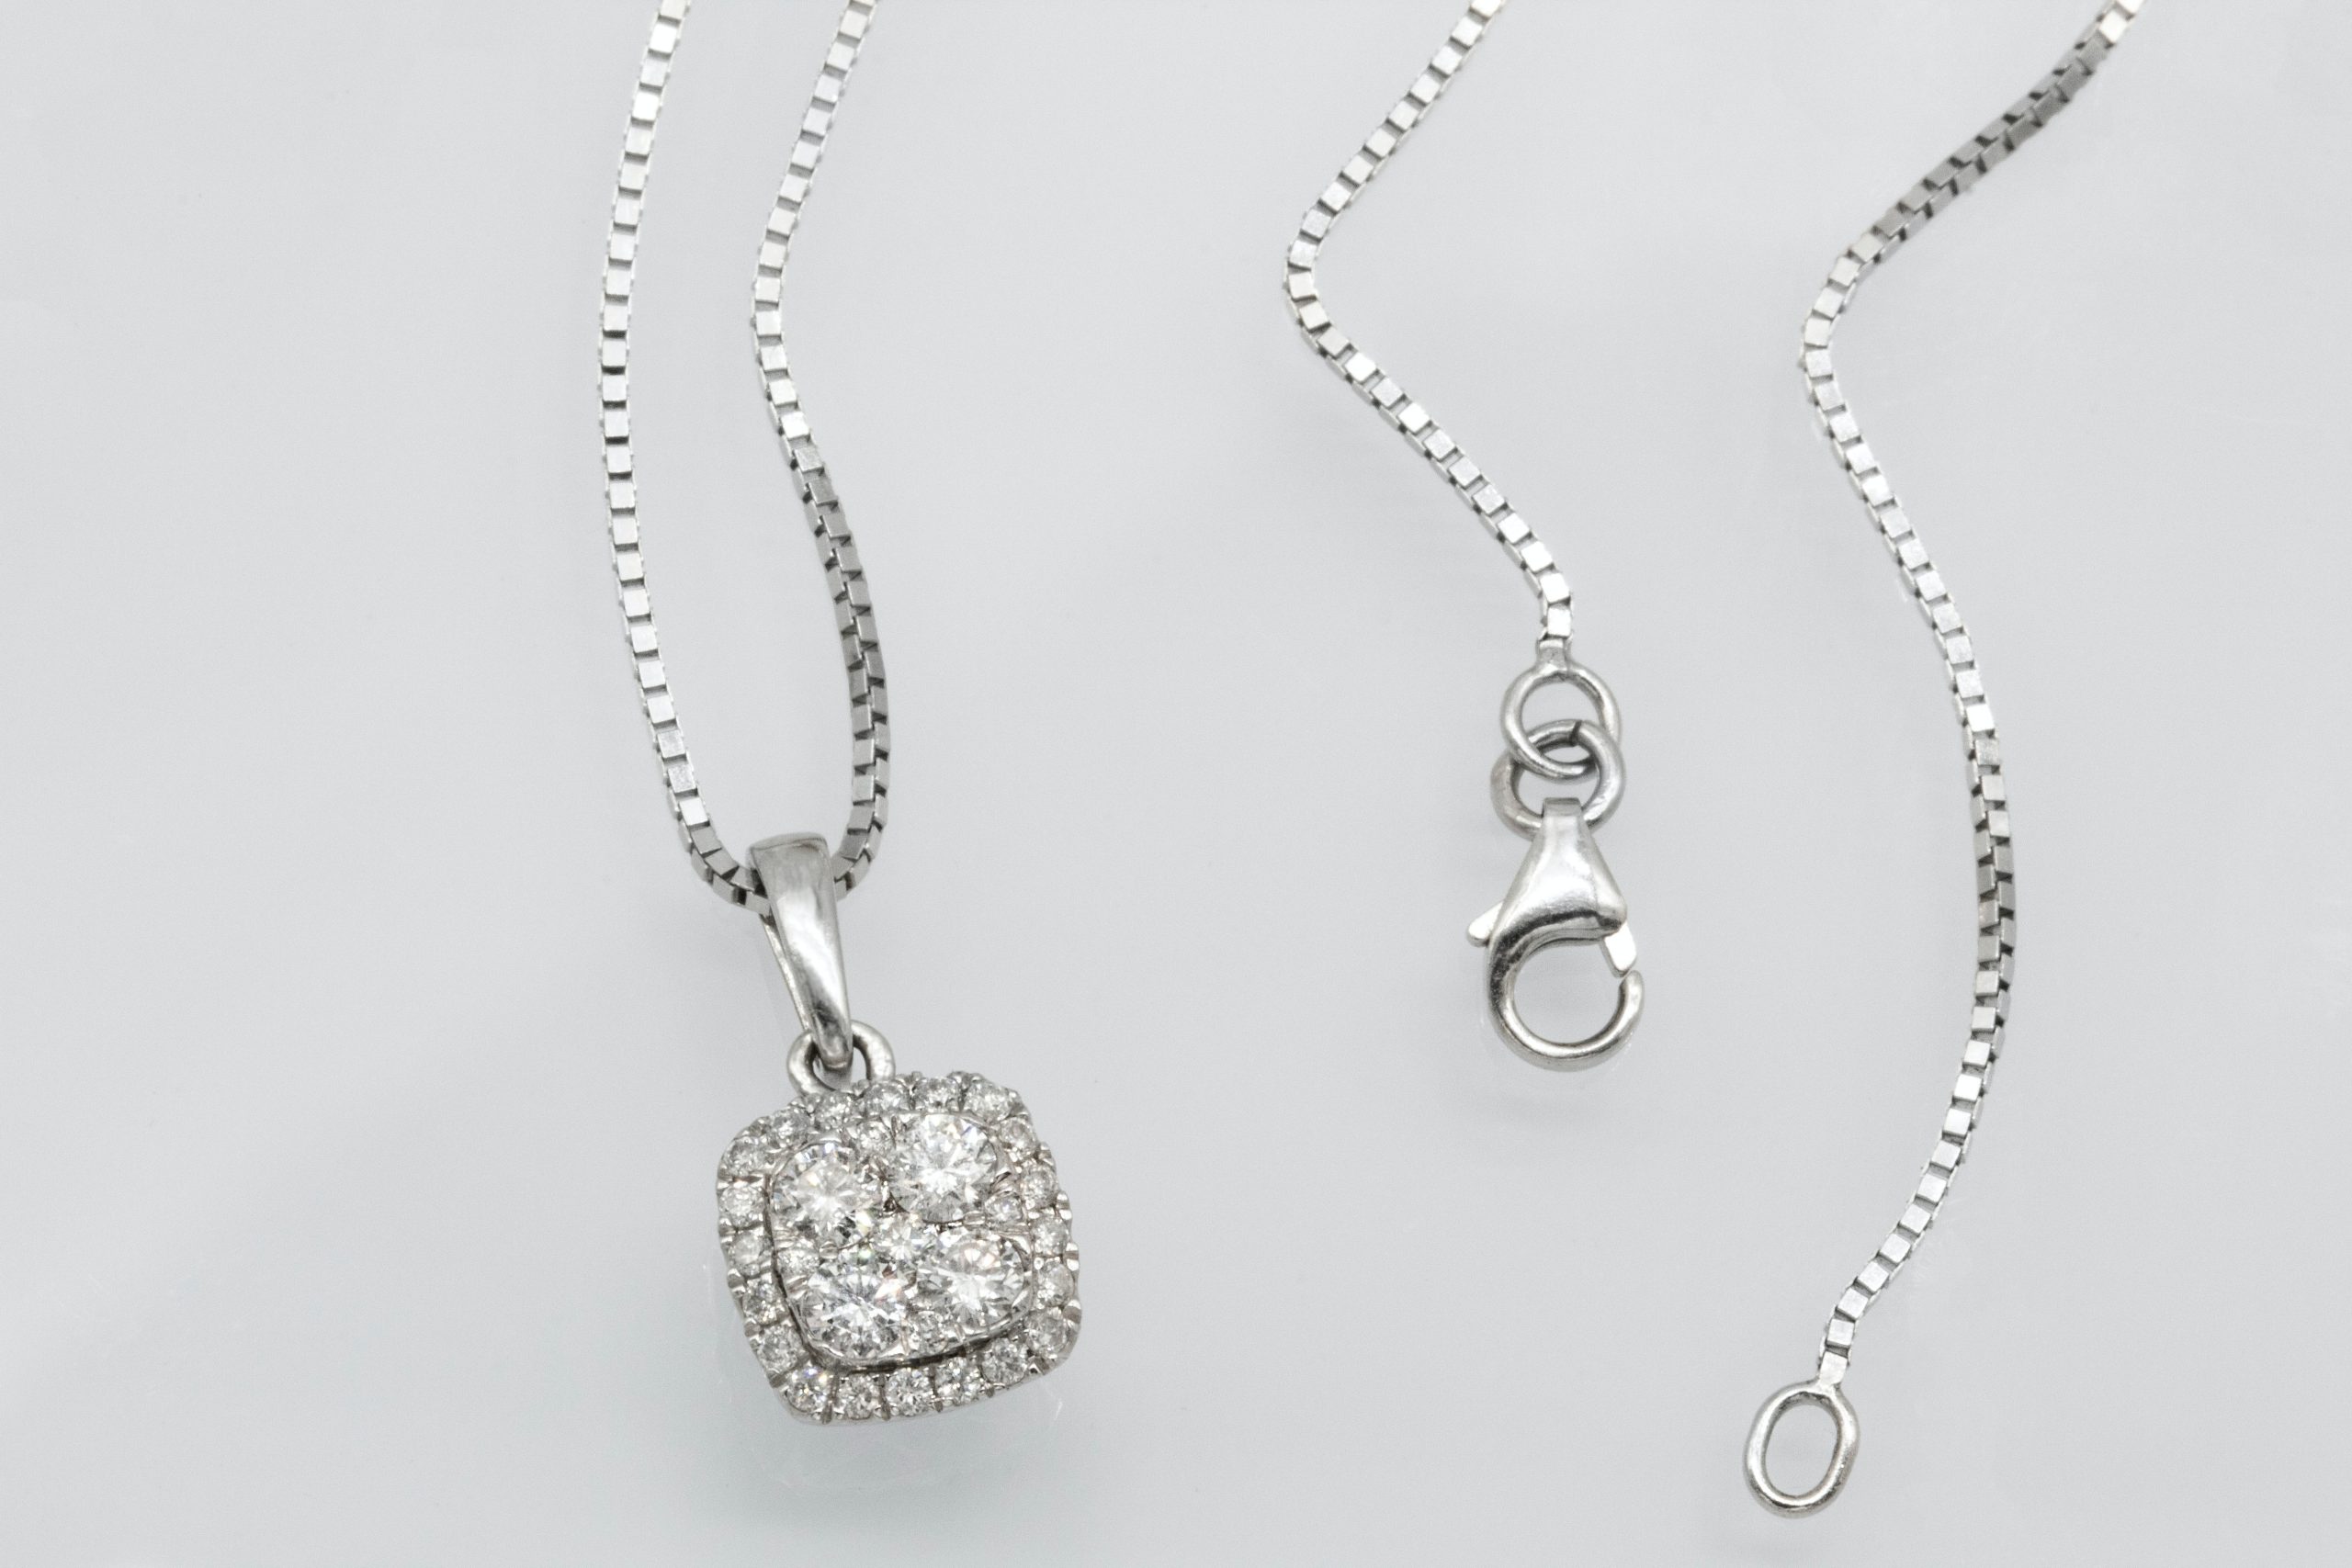 Styling with Art Deco: The Pave Diamond Necklace Takes the Starring Role